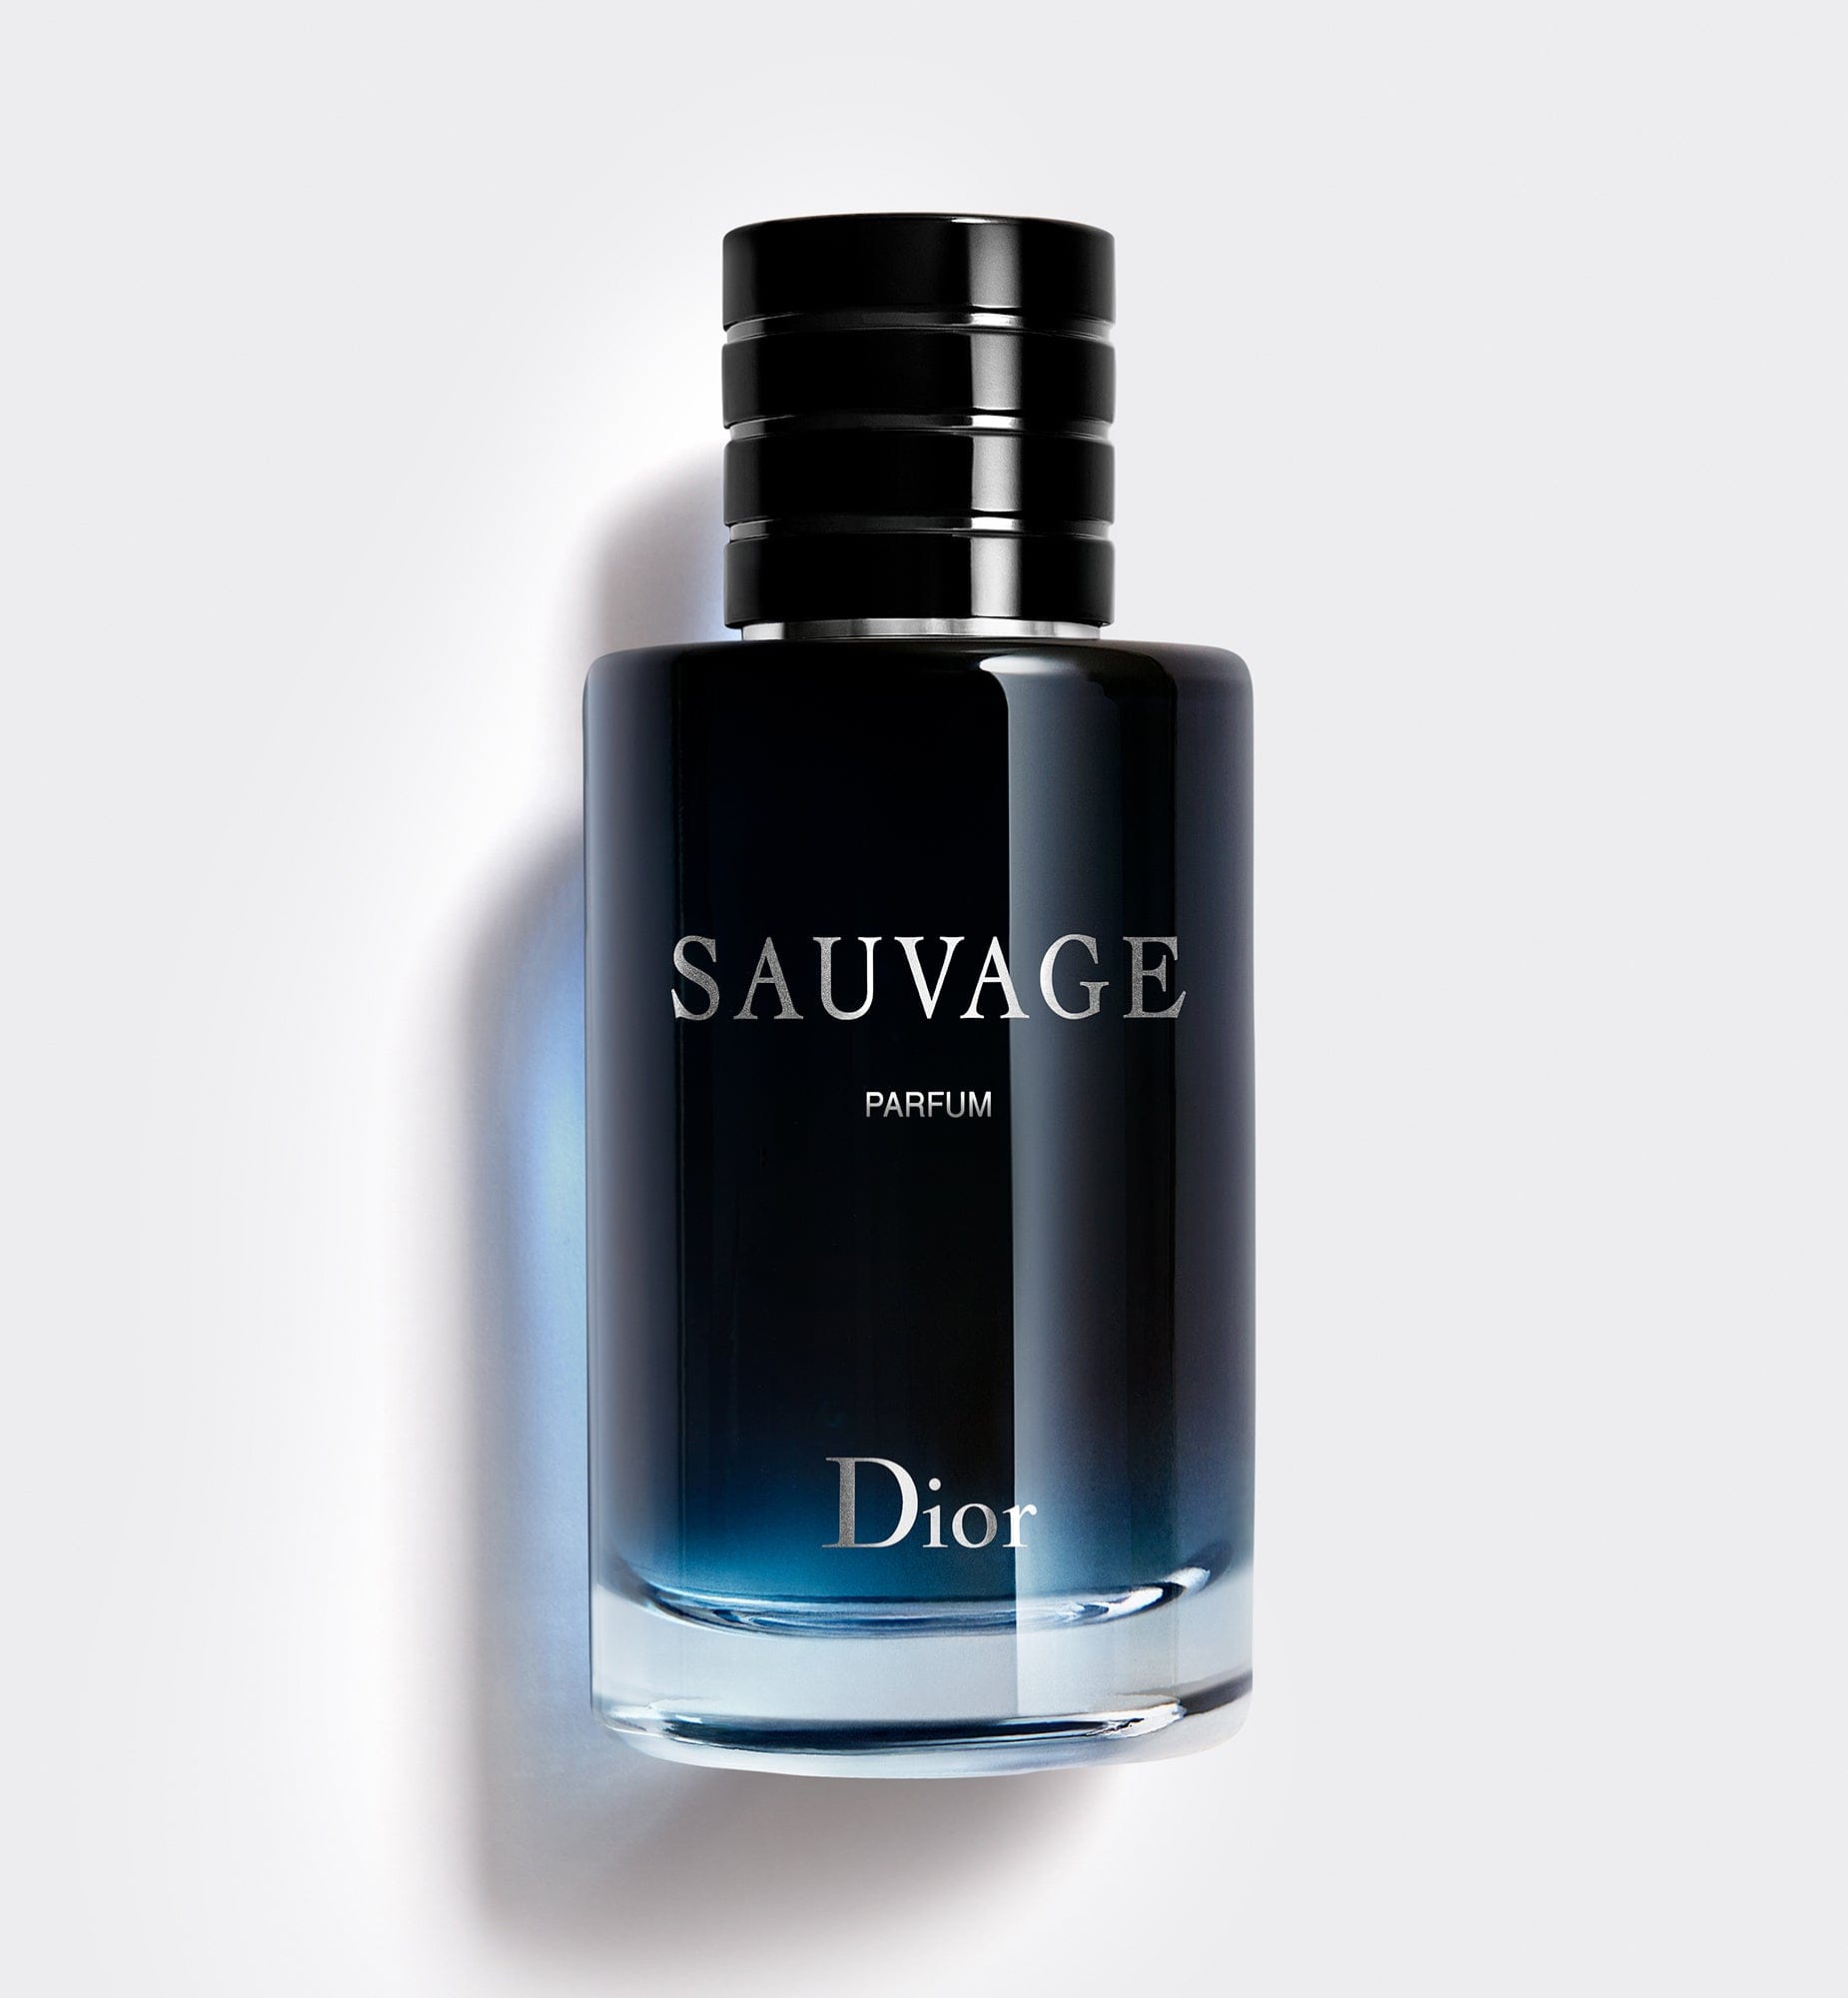 Sauvage Parfum | Parfum - citrus and woody notes - refillable